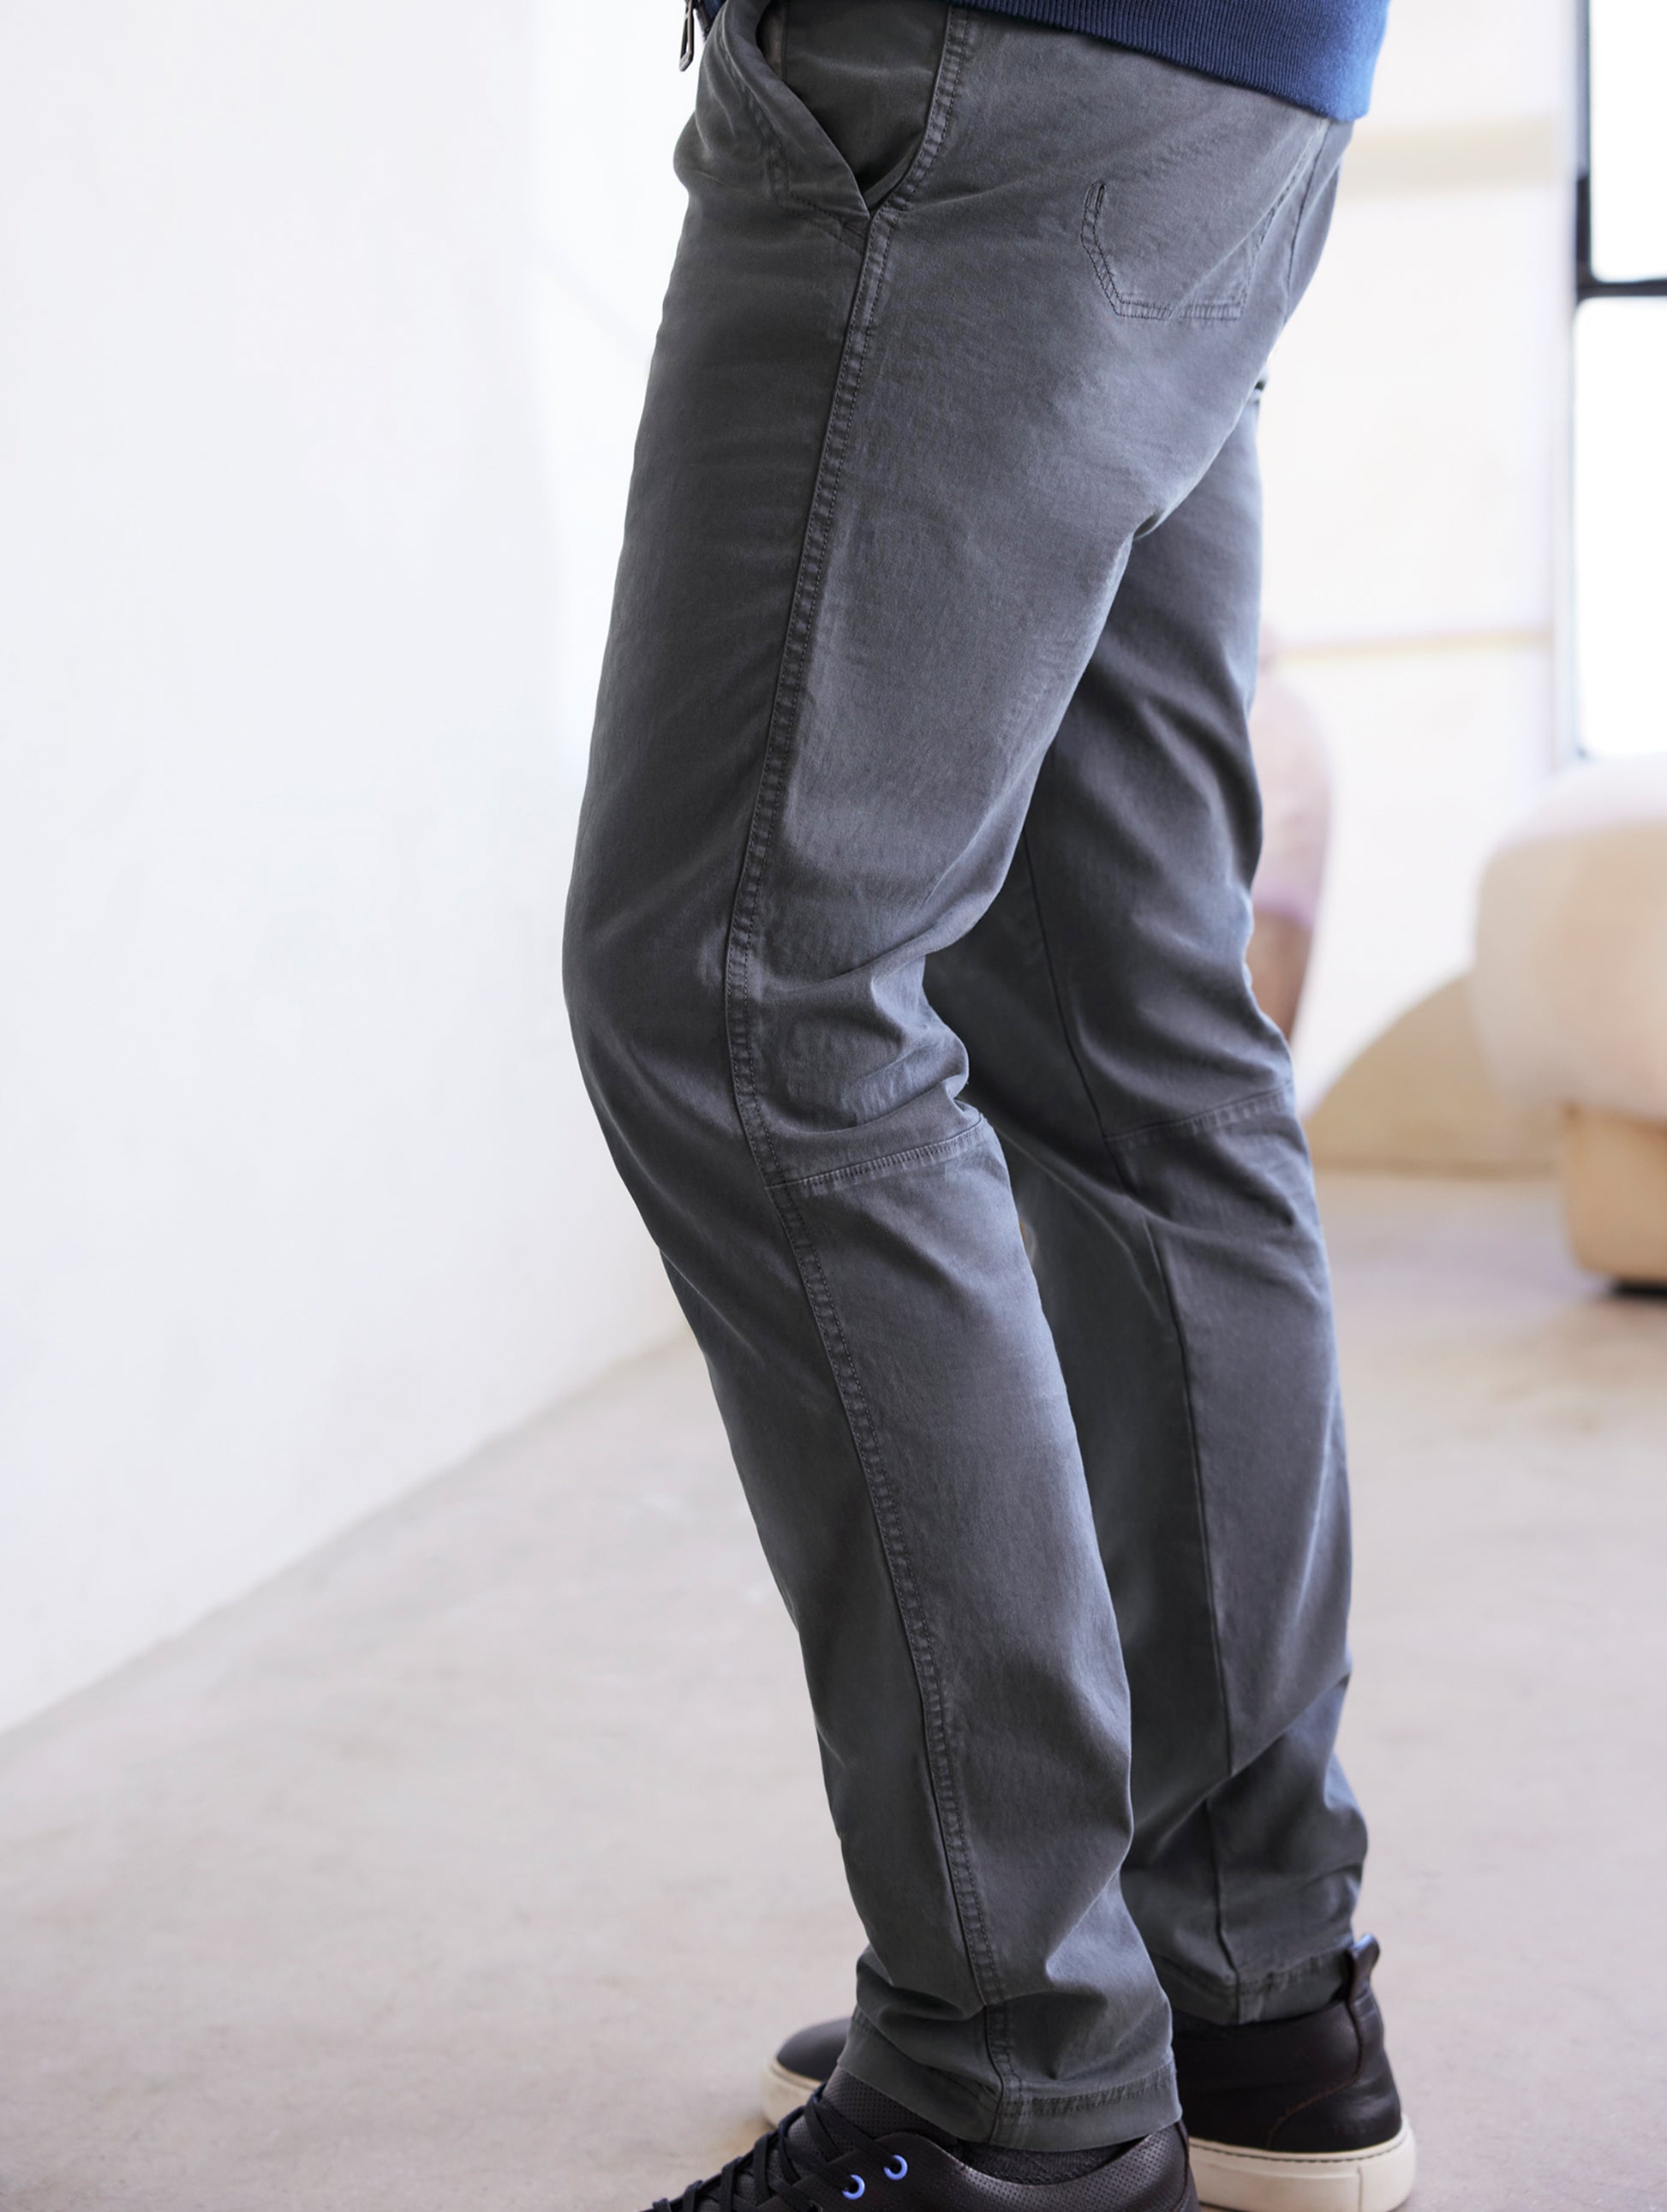 man wearing grey pants from AETHER Apparel